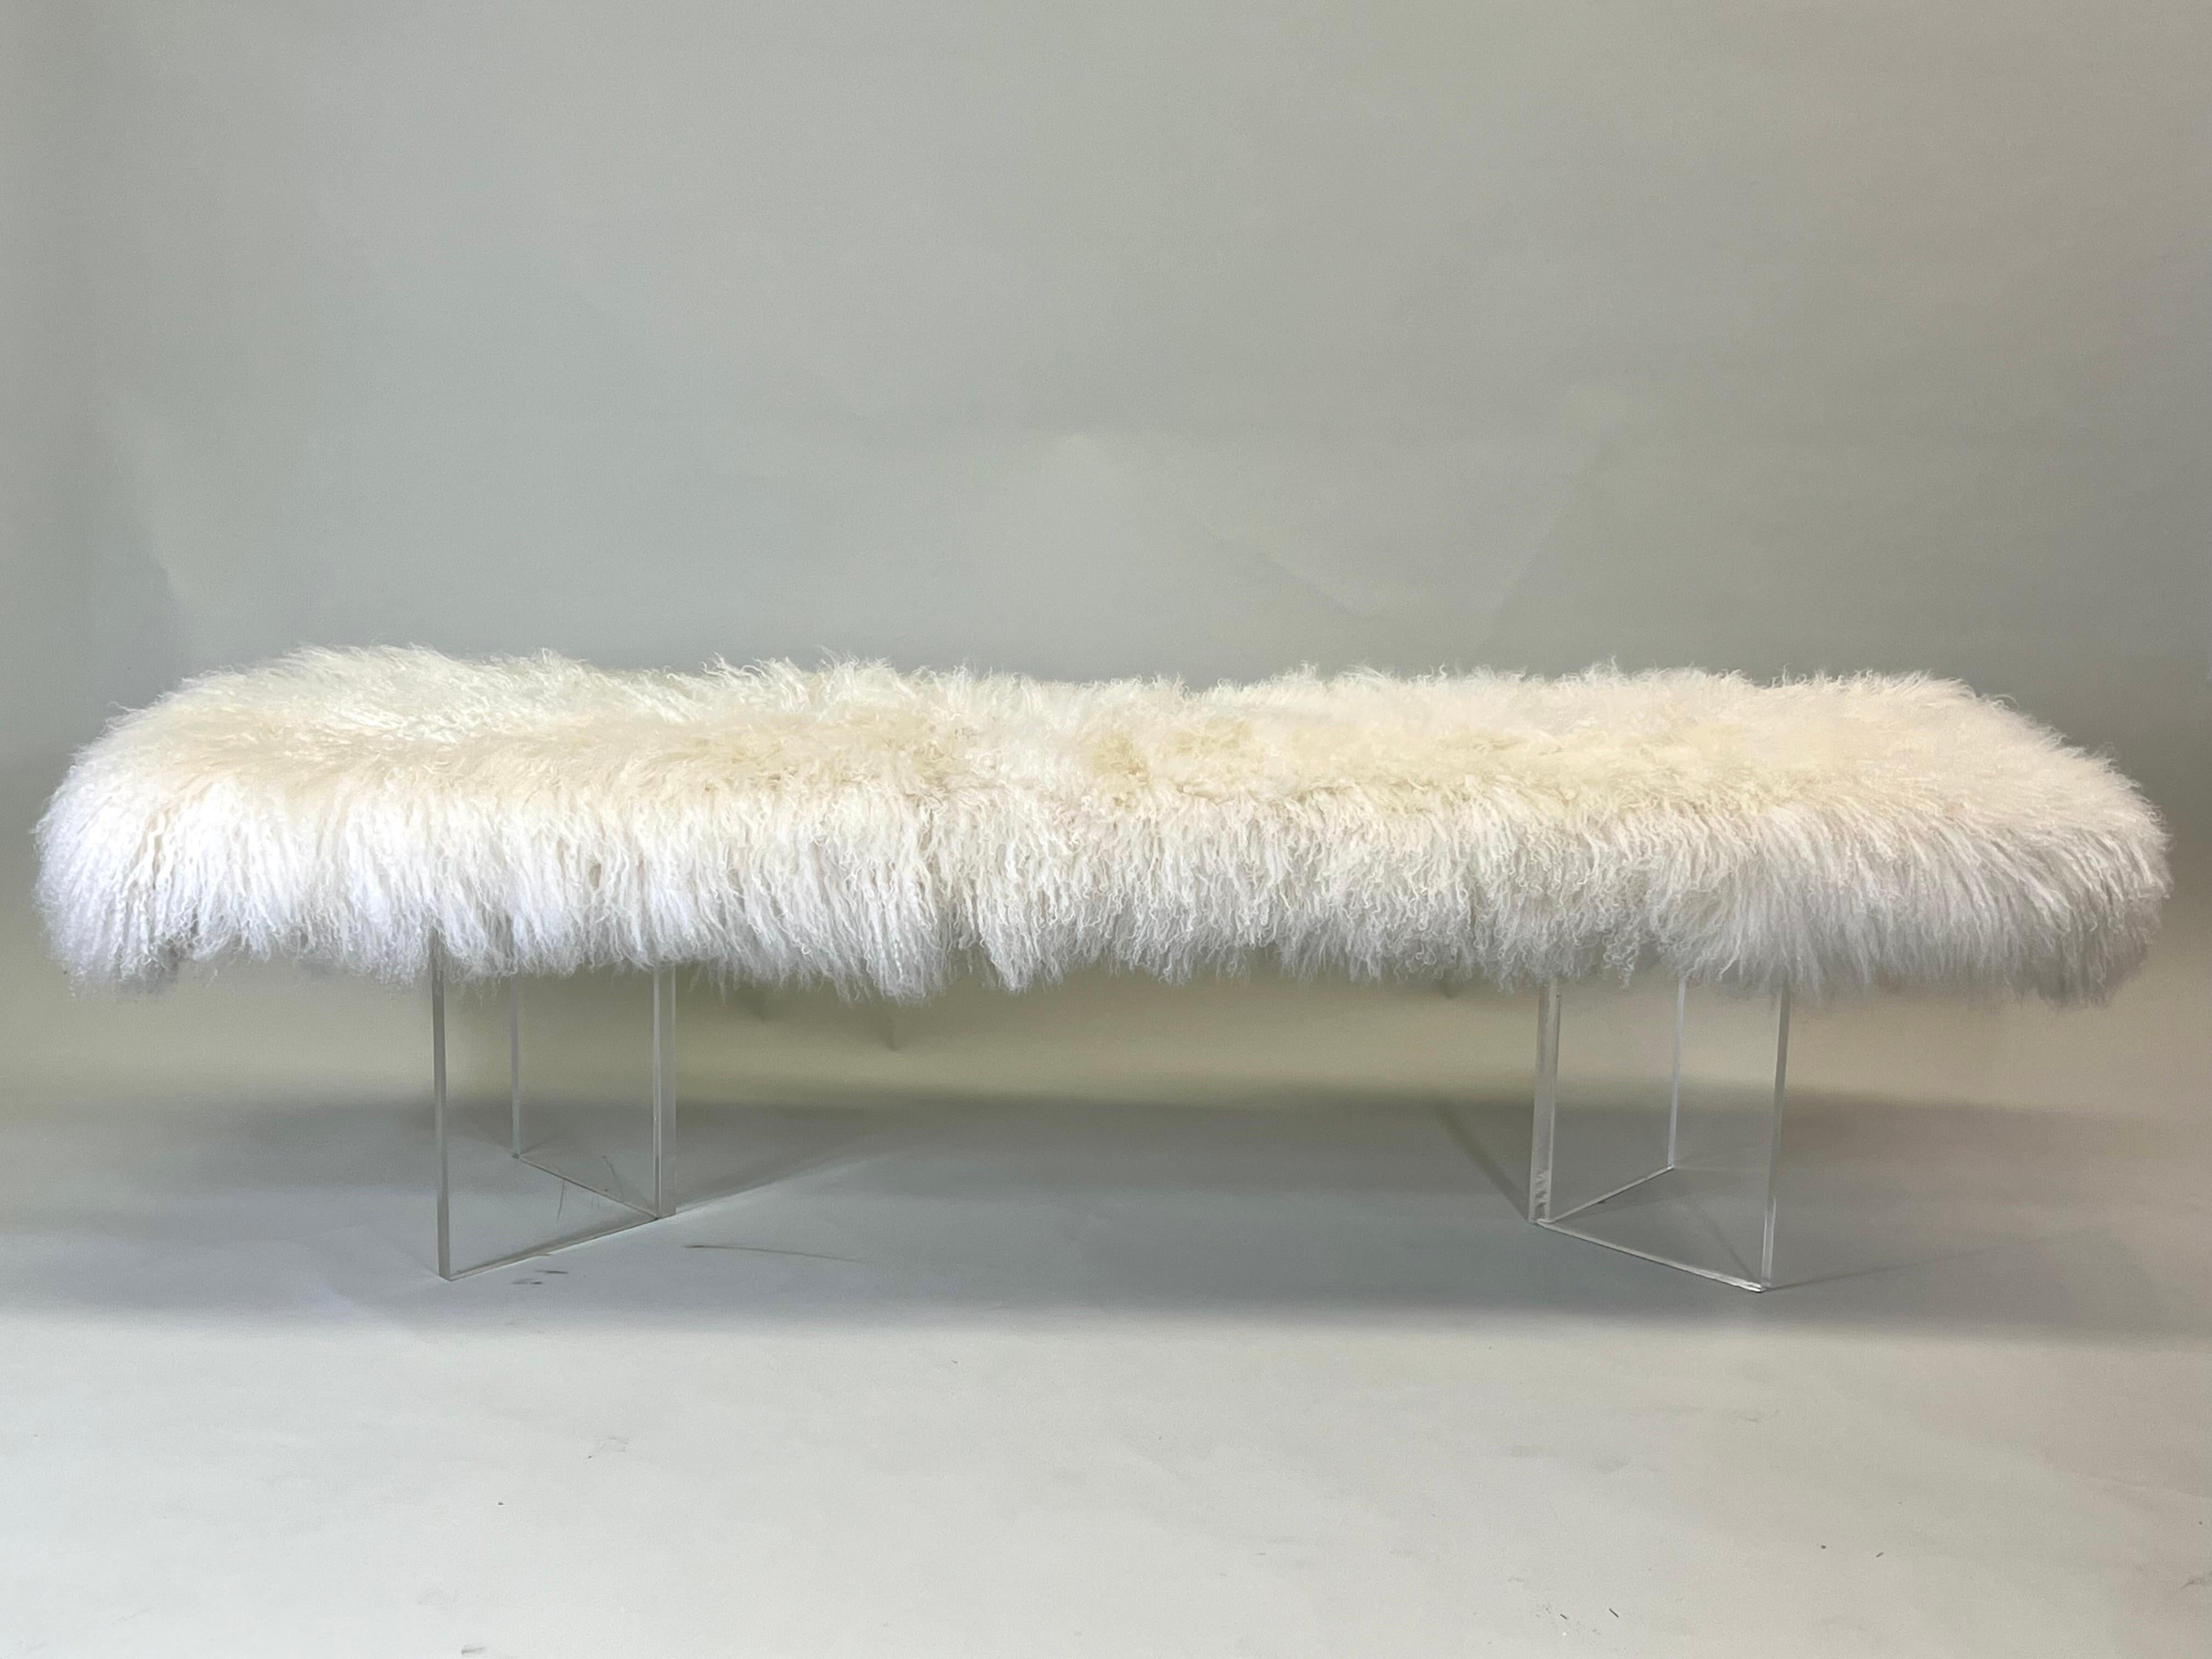 A Large, Elegant and Dramatic Italian Mid-Century Modern Bench Attributed to Marzio Cecchi circa 1970. This Italian bench has a light, ethereal presence due to to its lucite base which allows the bench to appear as if it is floating. The base is